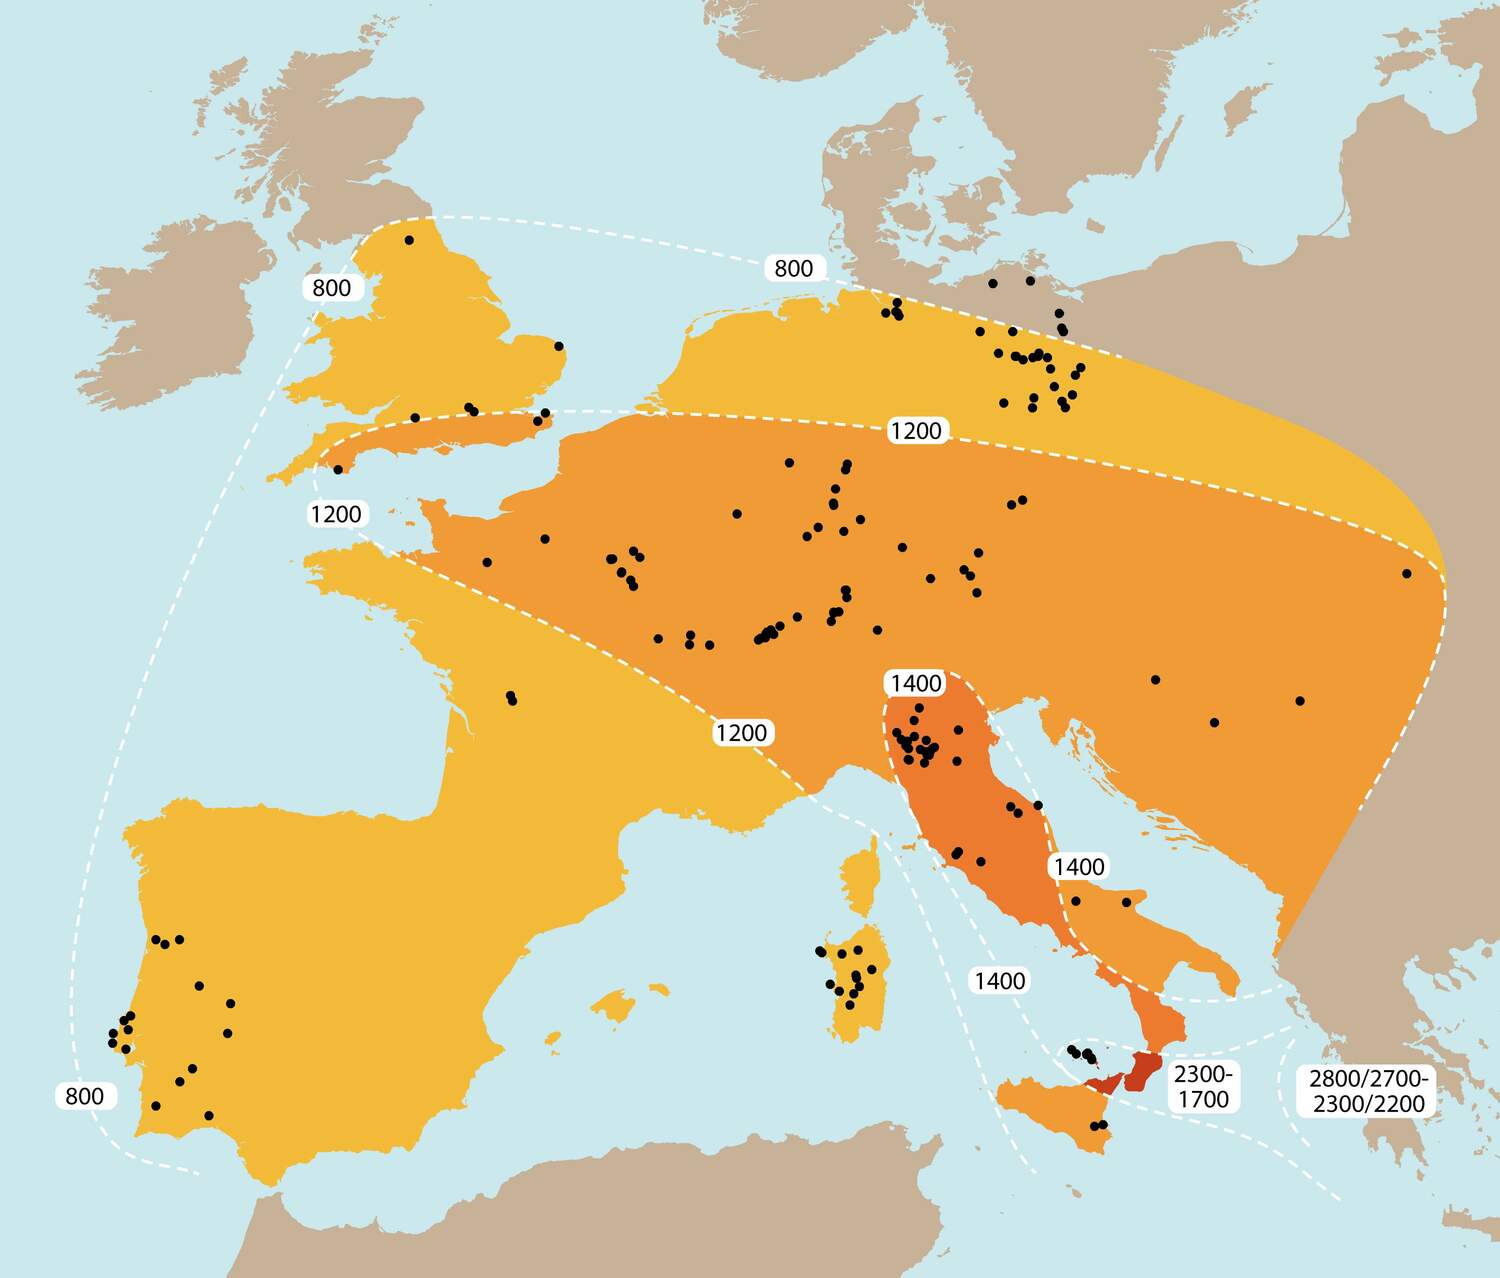 Map showing the spread of weighing technology in Bronze Age Europe (c. 2300-800 BC)